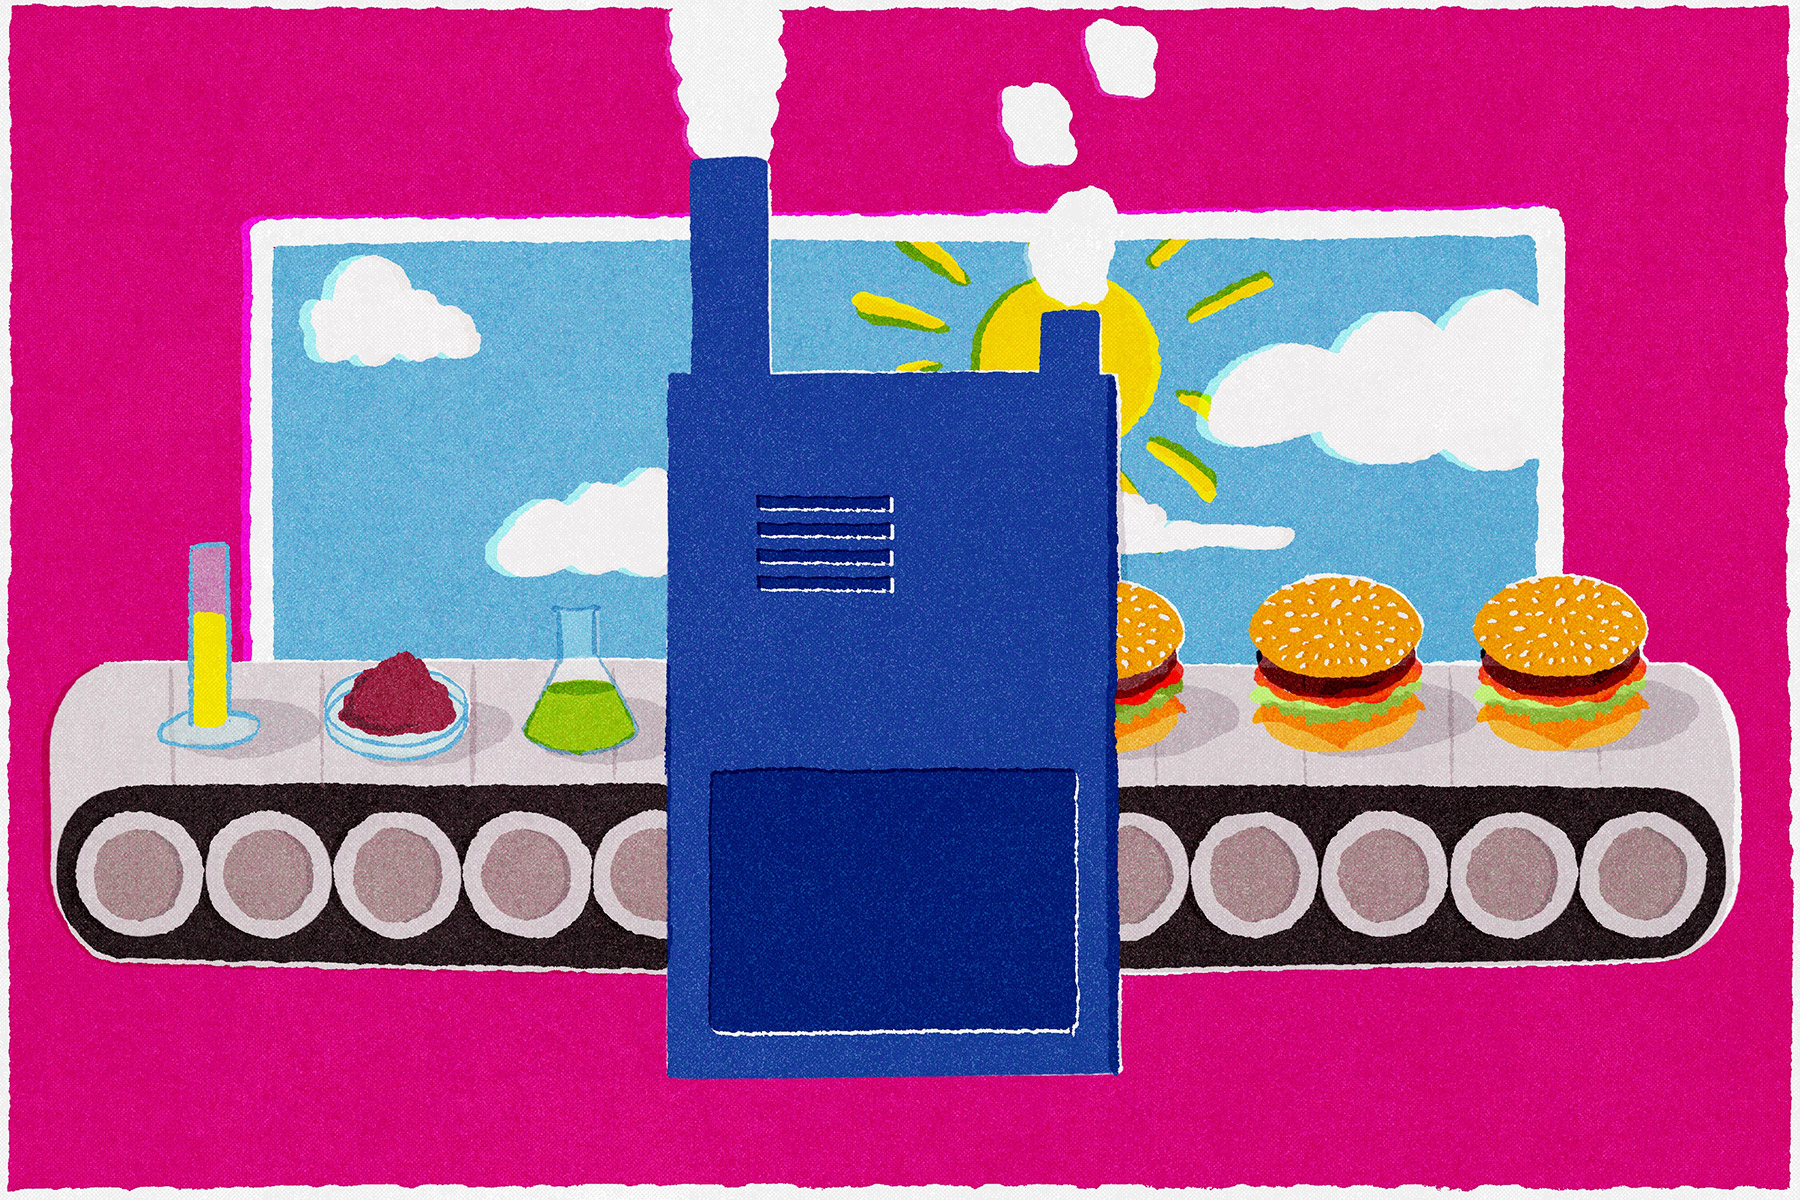 An illustration of a factory conveyor belt: on the left, chemical beakers and petri dishes of ingredients go in; on the right, hamburgers come out